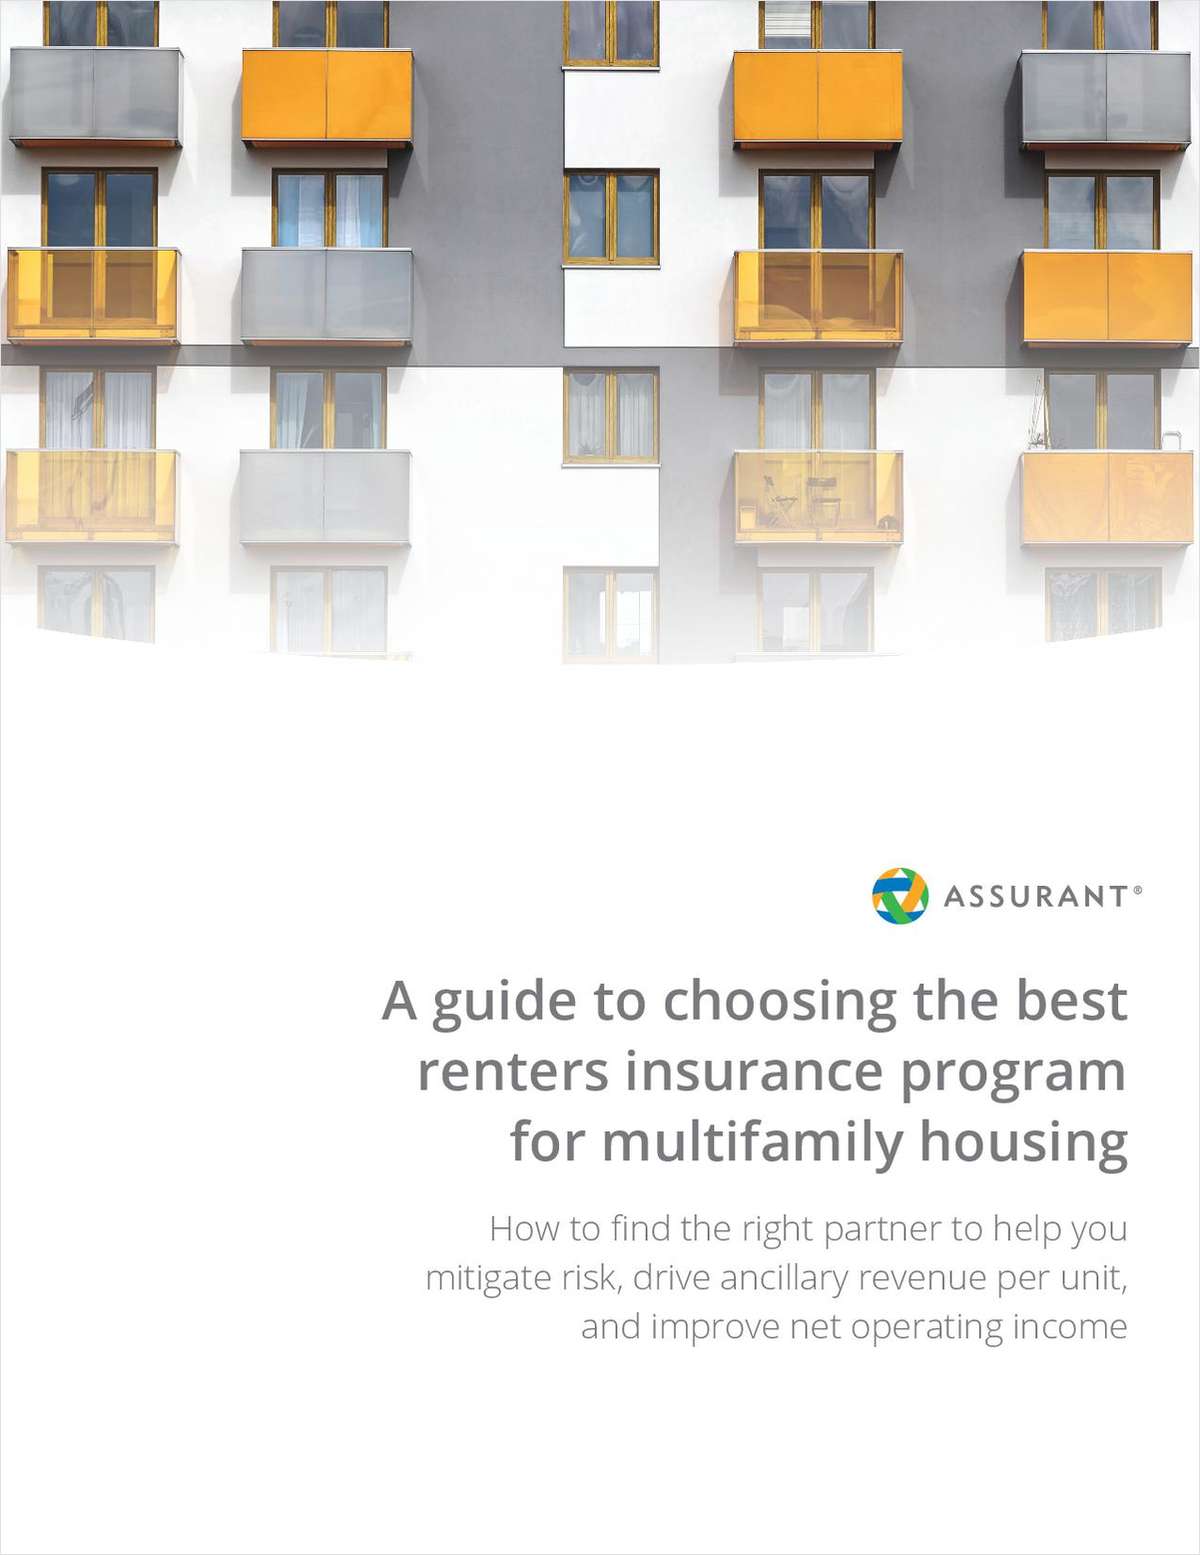 A Guide to Choosing the Best Renters Insurance Program for Multifamily Housing link